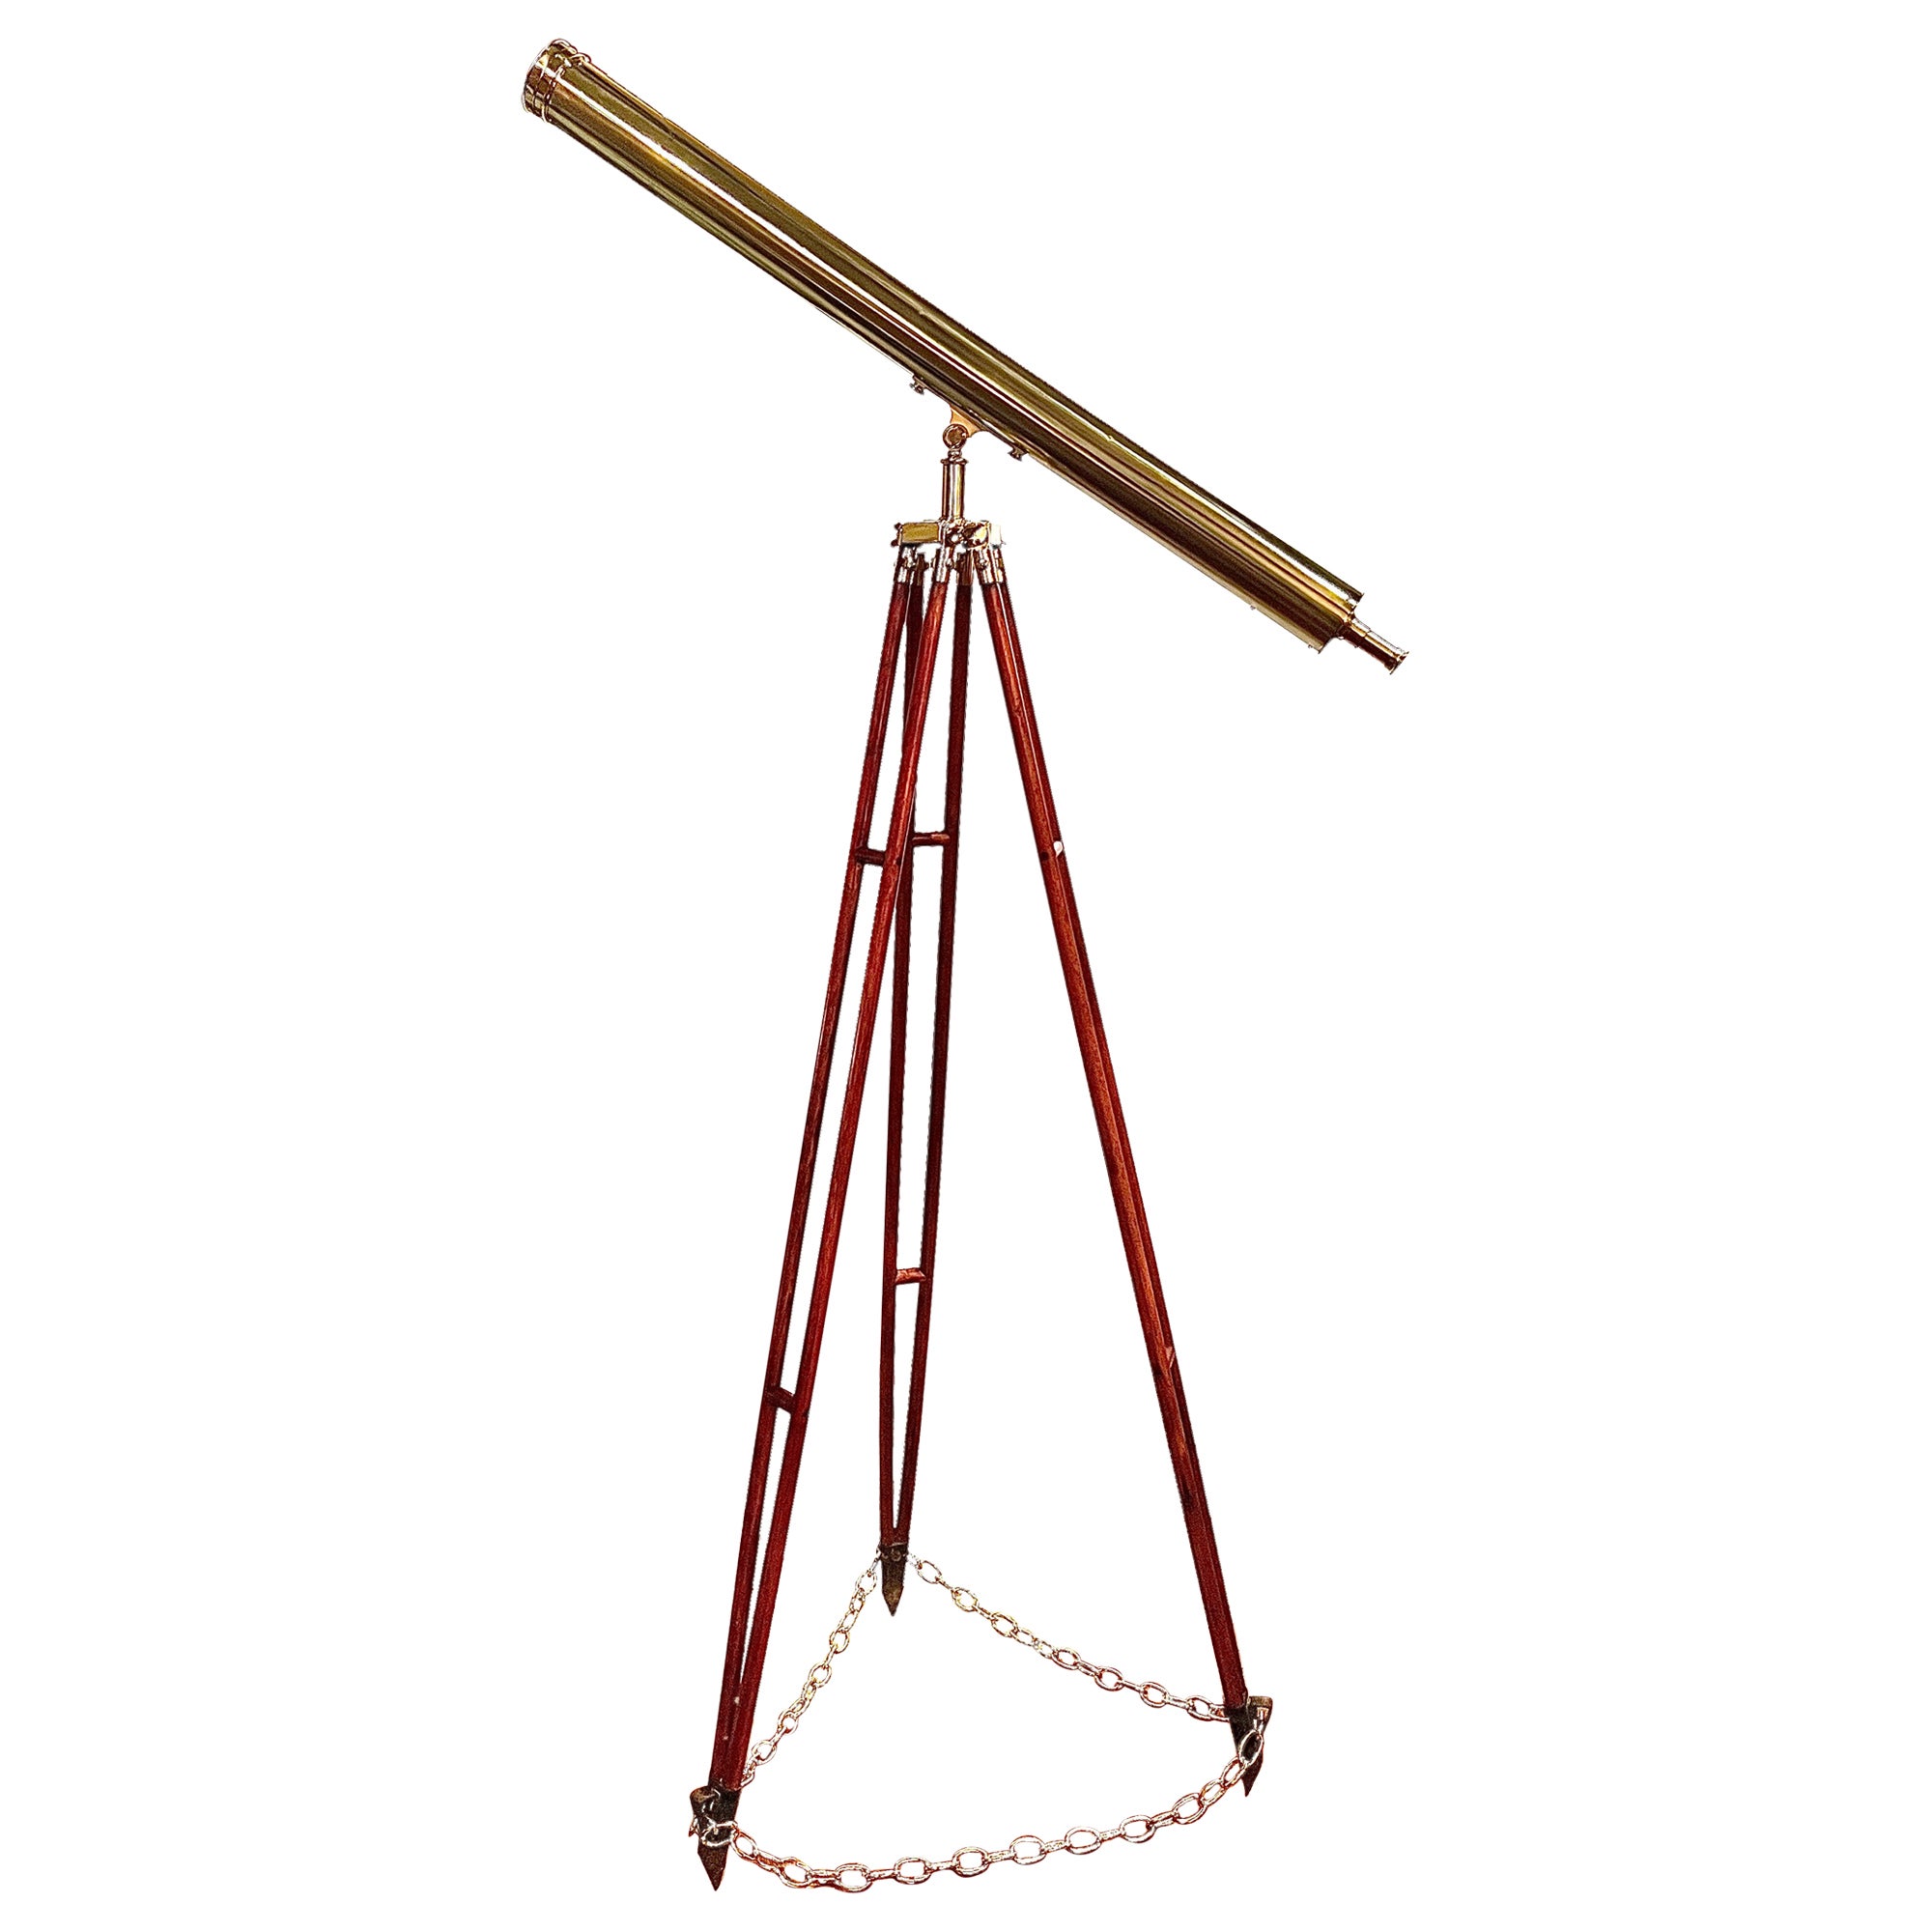 Antique English Brass Telescope Mounted on Wooden Stand, Circa 1880. For Sale